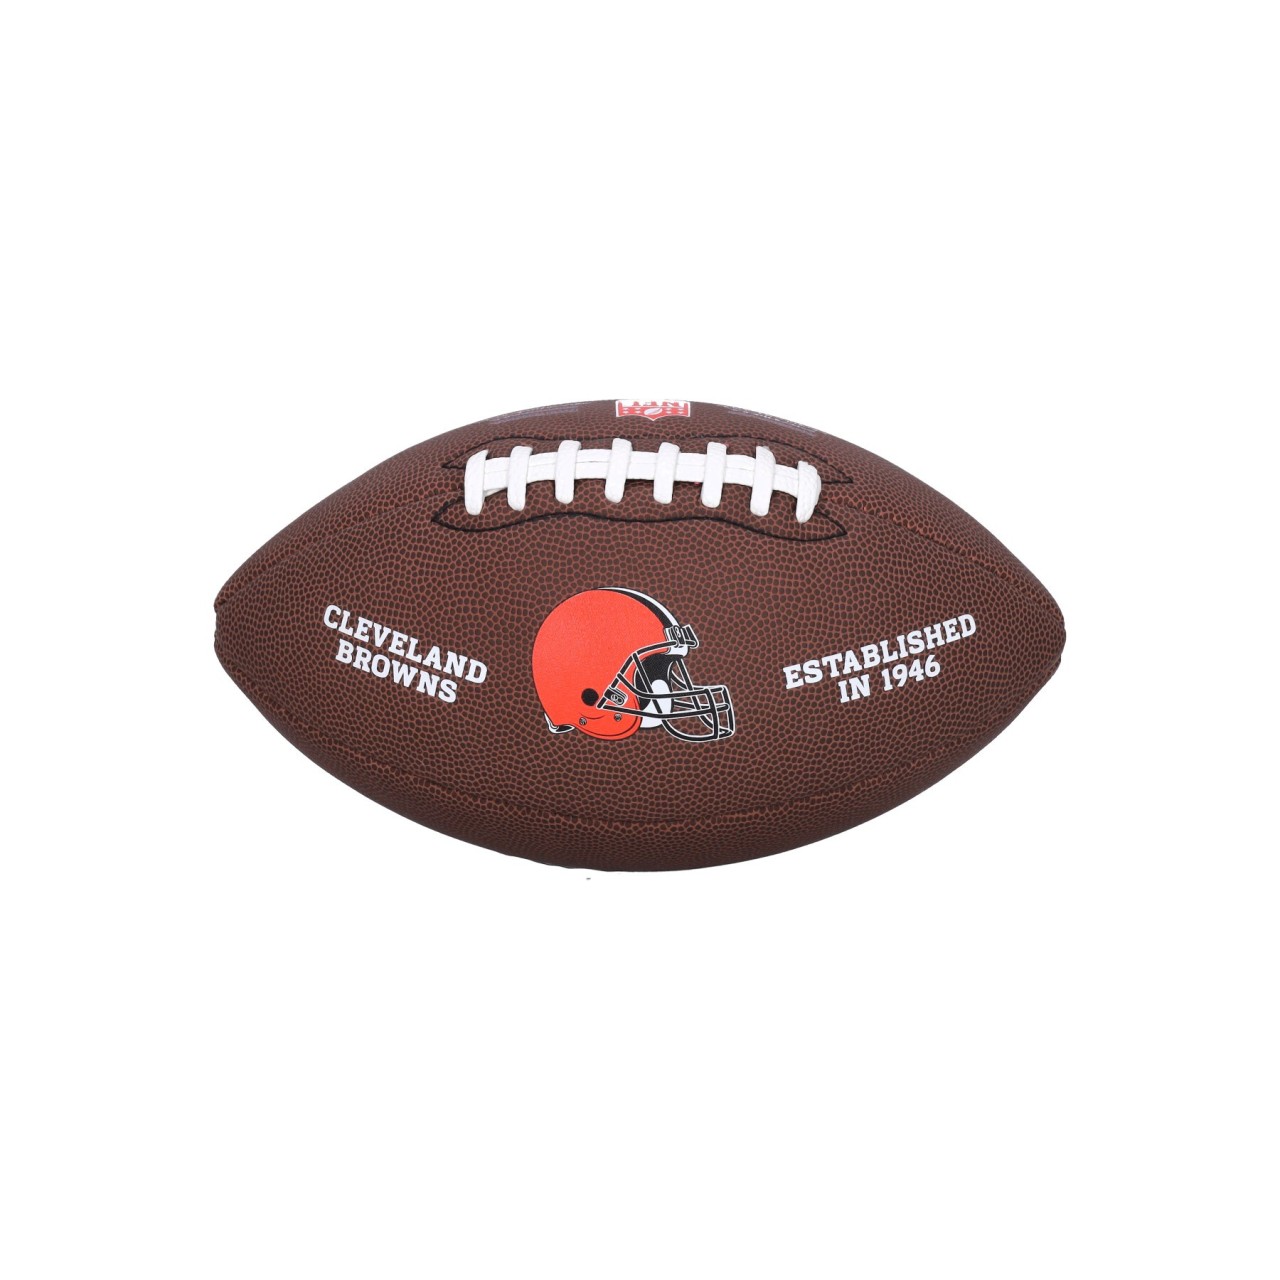 WILSON TEAM NFL LICENSED FOOTBALL CLEBRO WTF1748XBCL